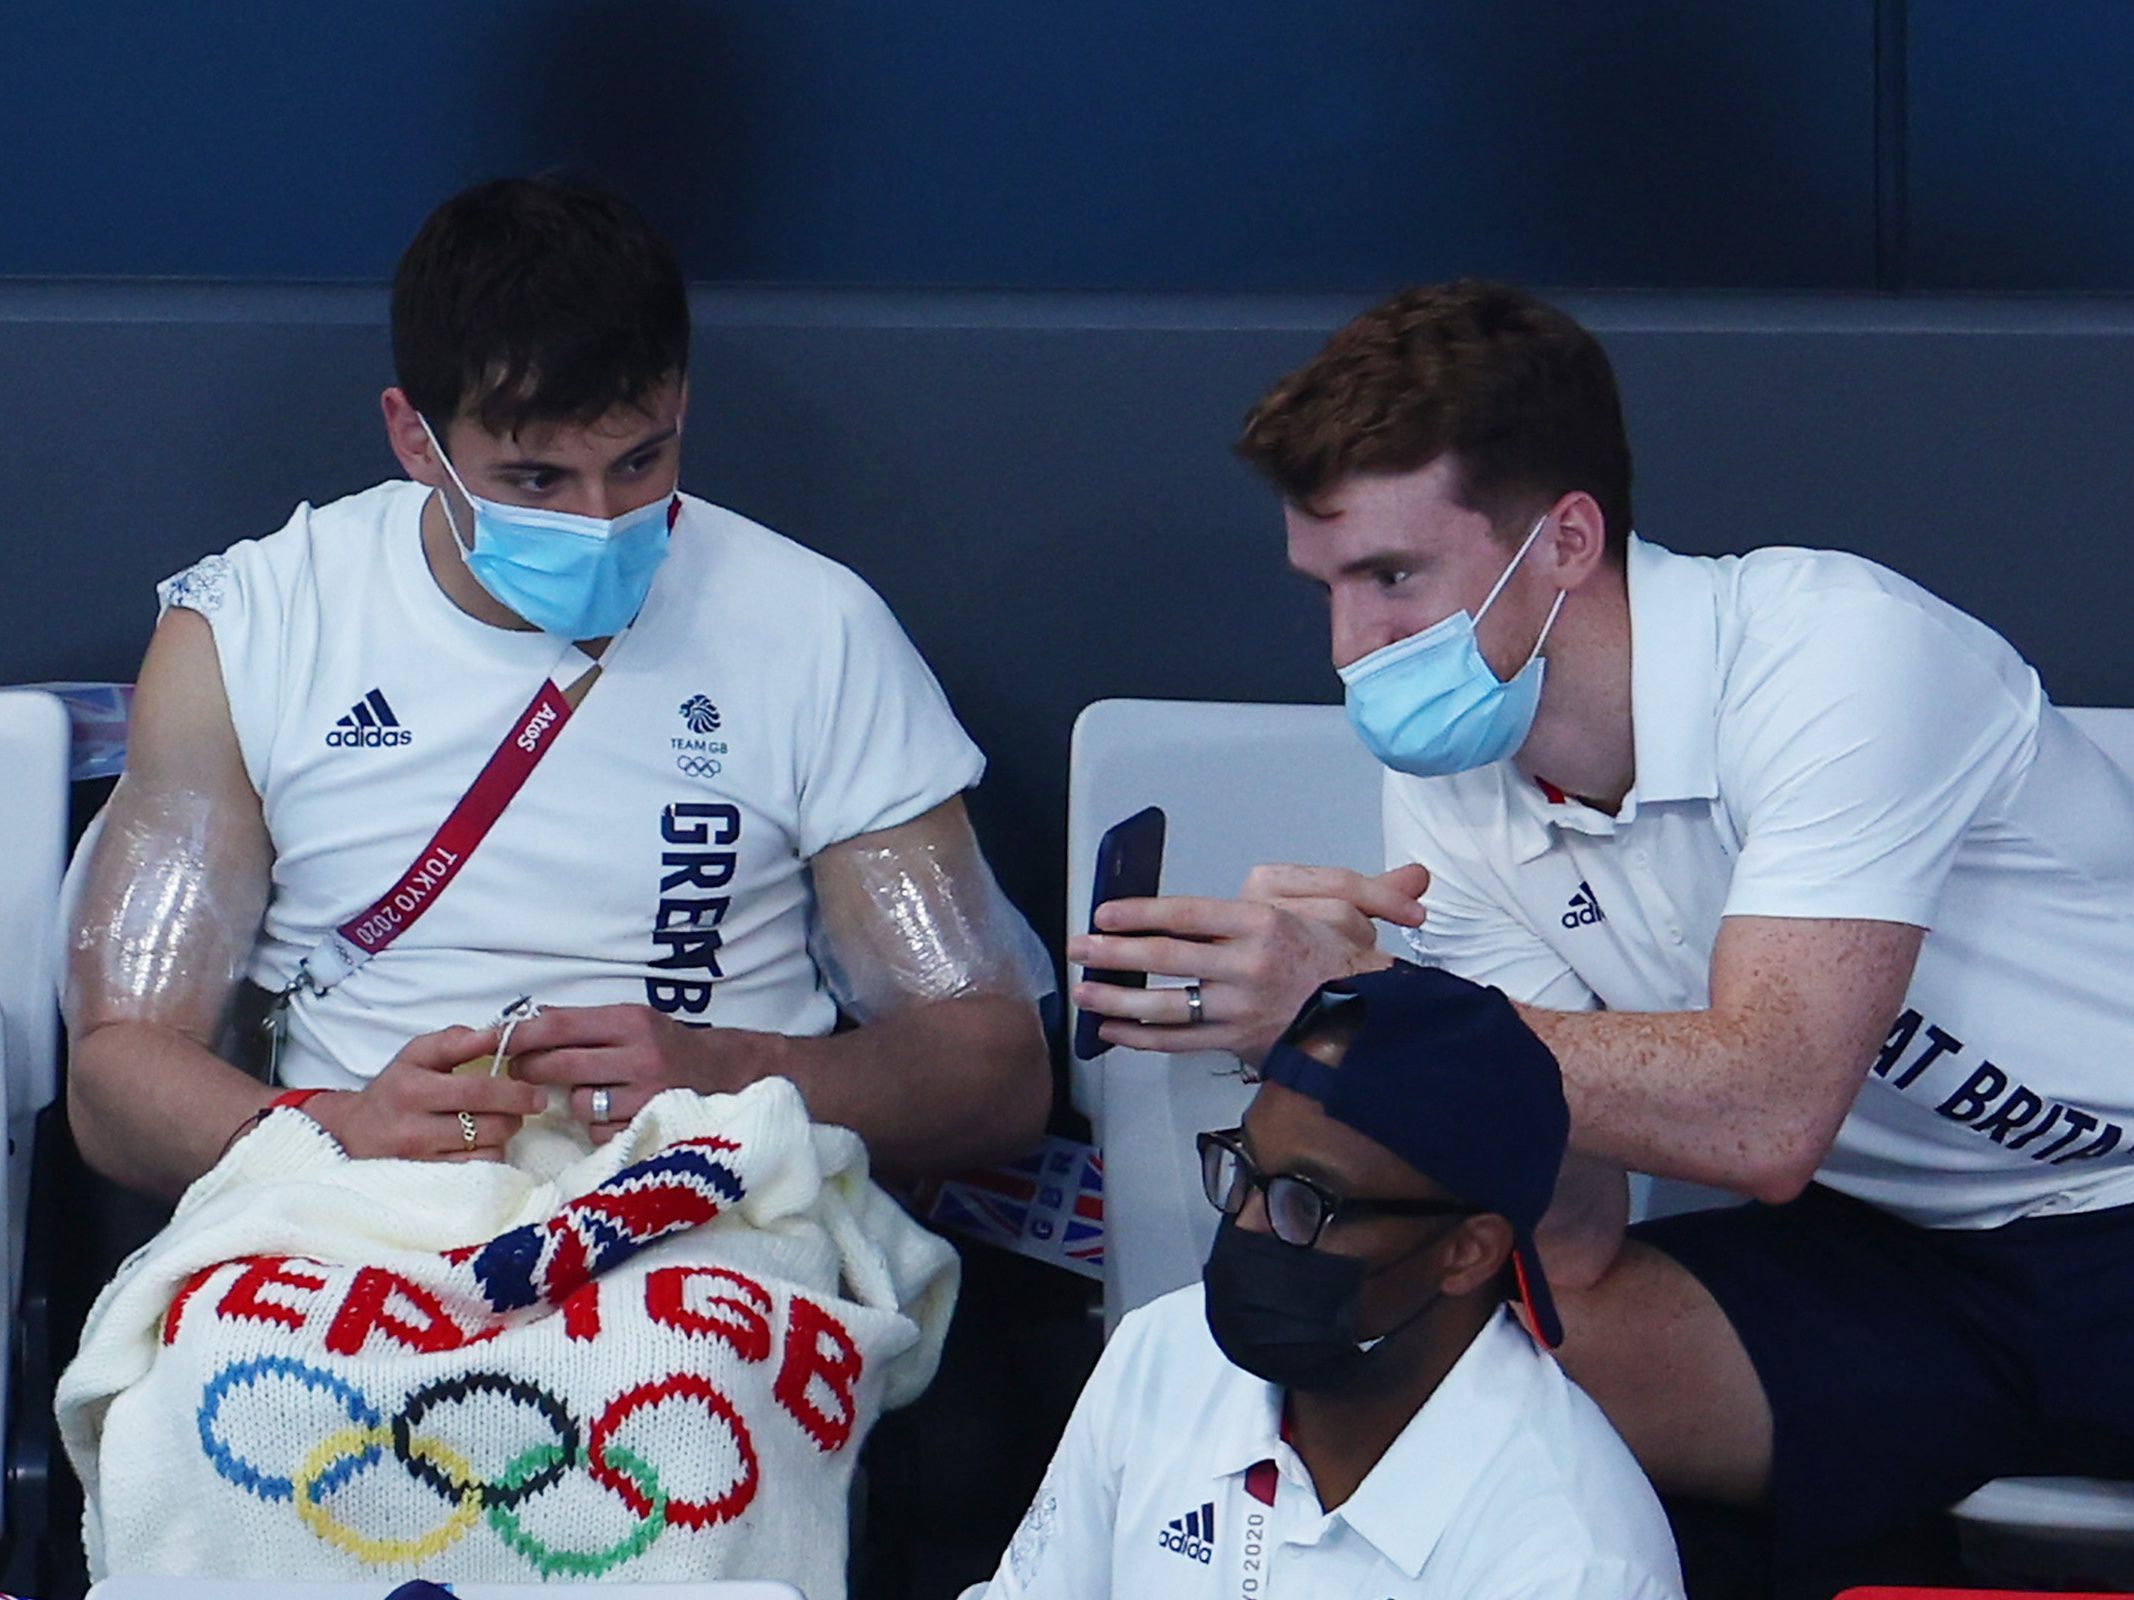 FILE: Tom Daley of Team Great Britain knits during the Men's 3m Springboard Preliminary Round on day ten of the Tokyo 2020 Olympic Games at Tokyo Aquatics Centre on Aug. 02, 2021 in Tokyo, Japan. /